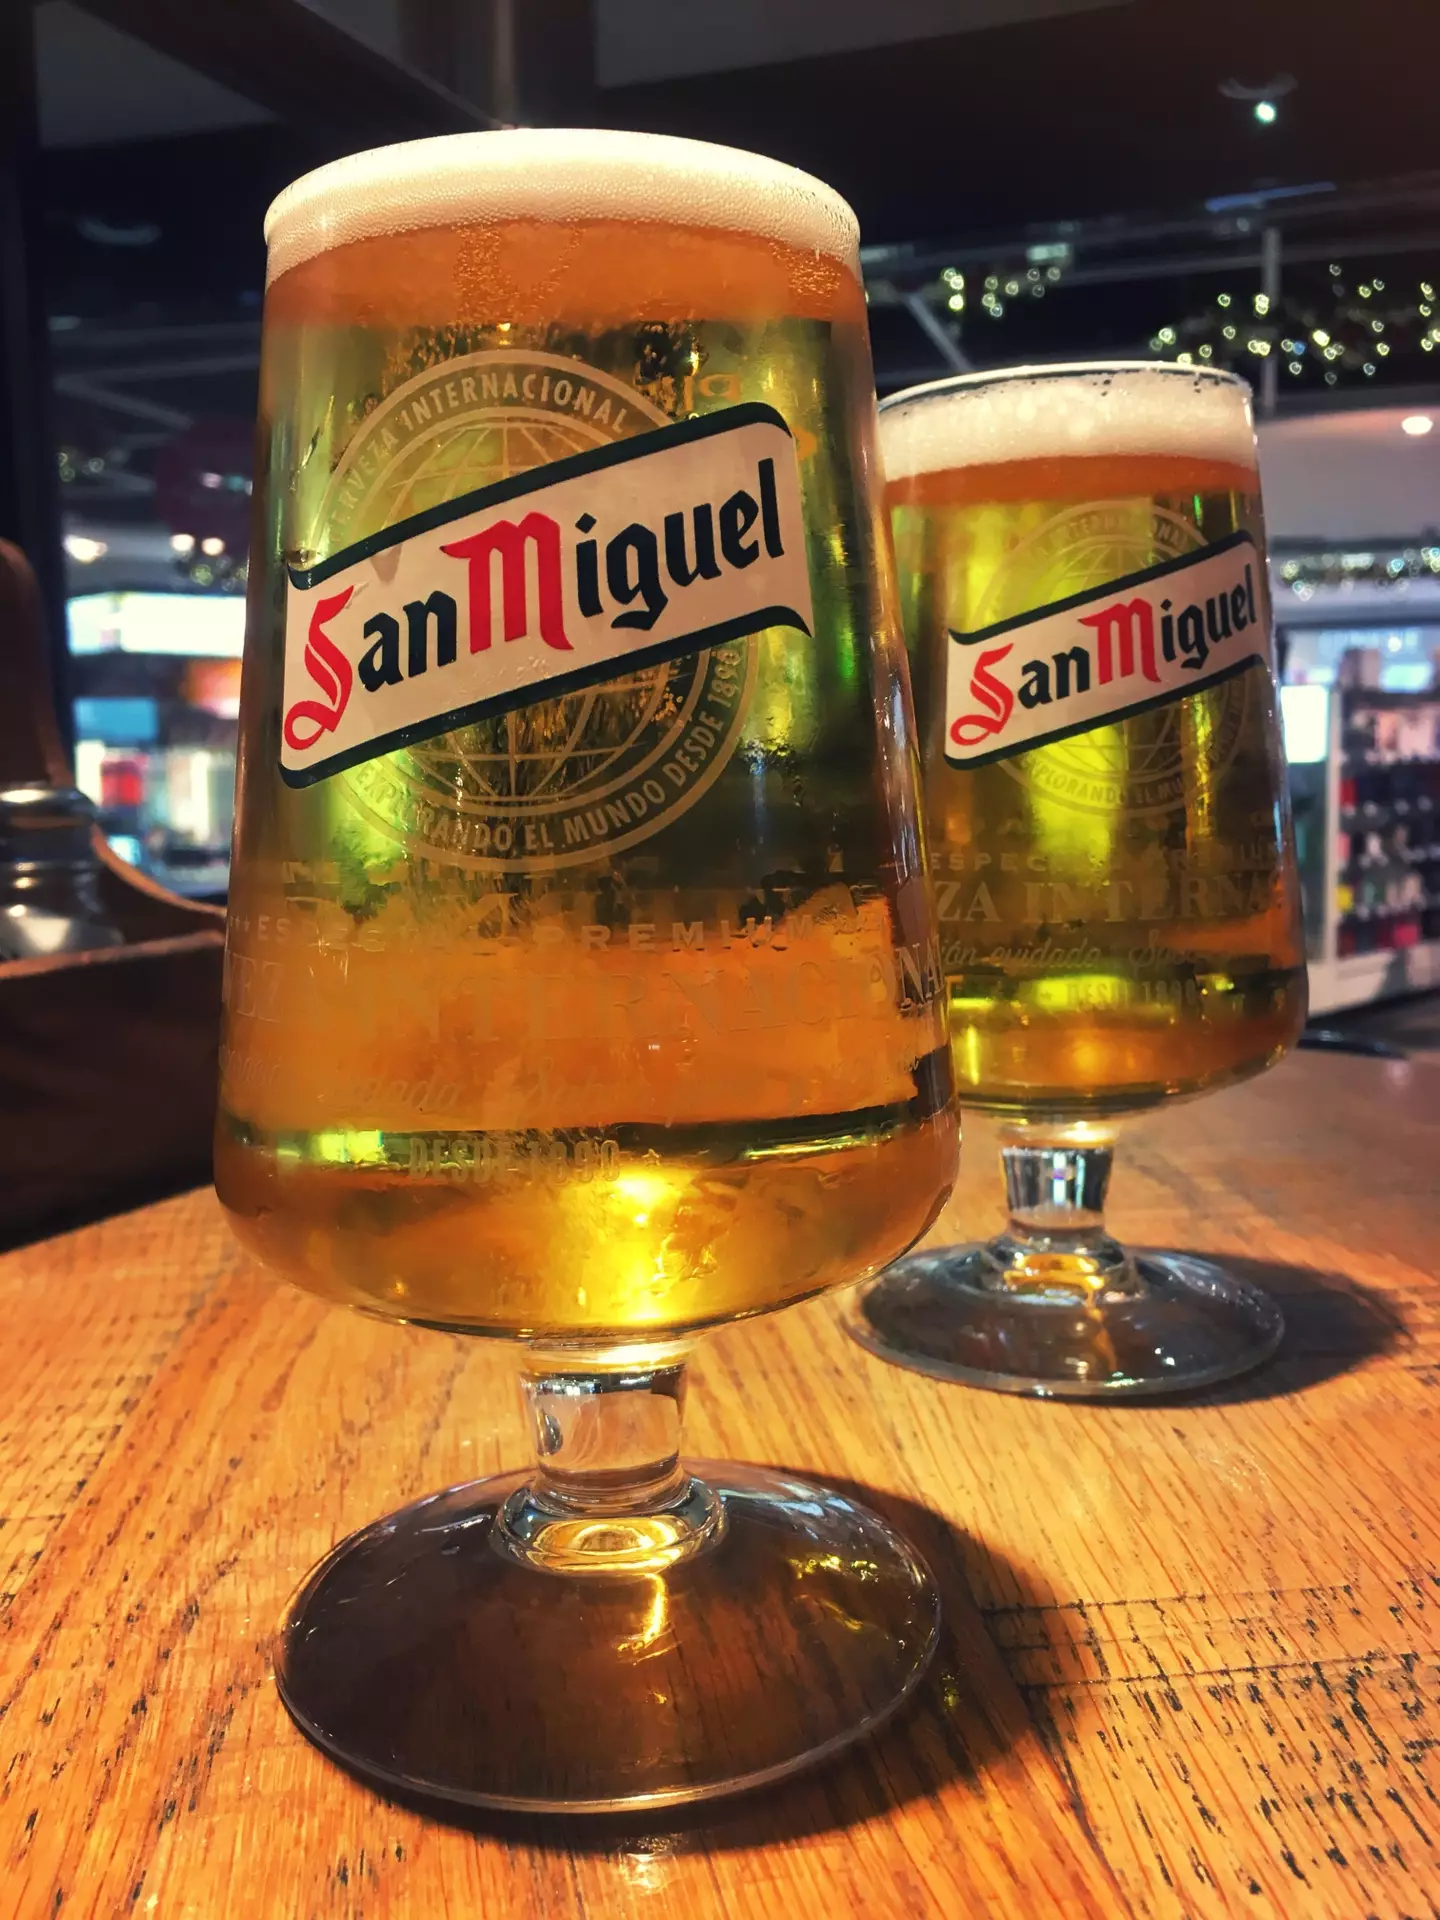 San Miguel scored top of the charts with category A.